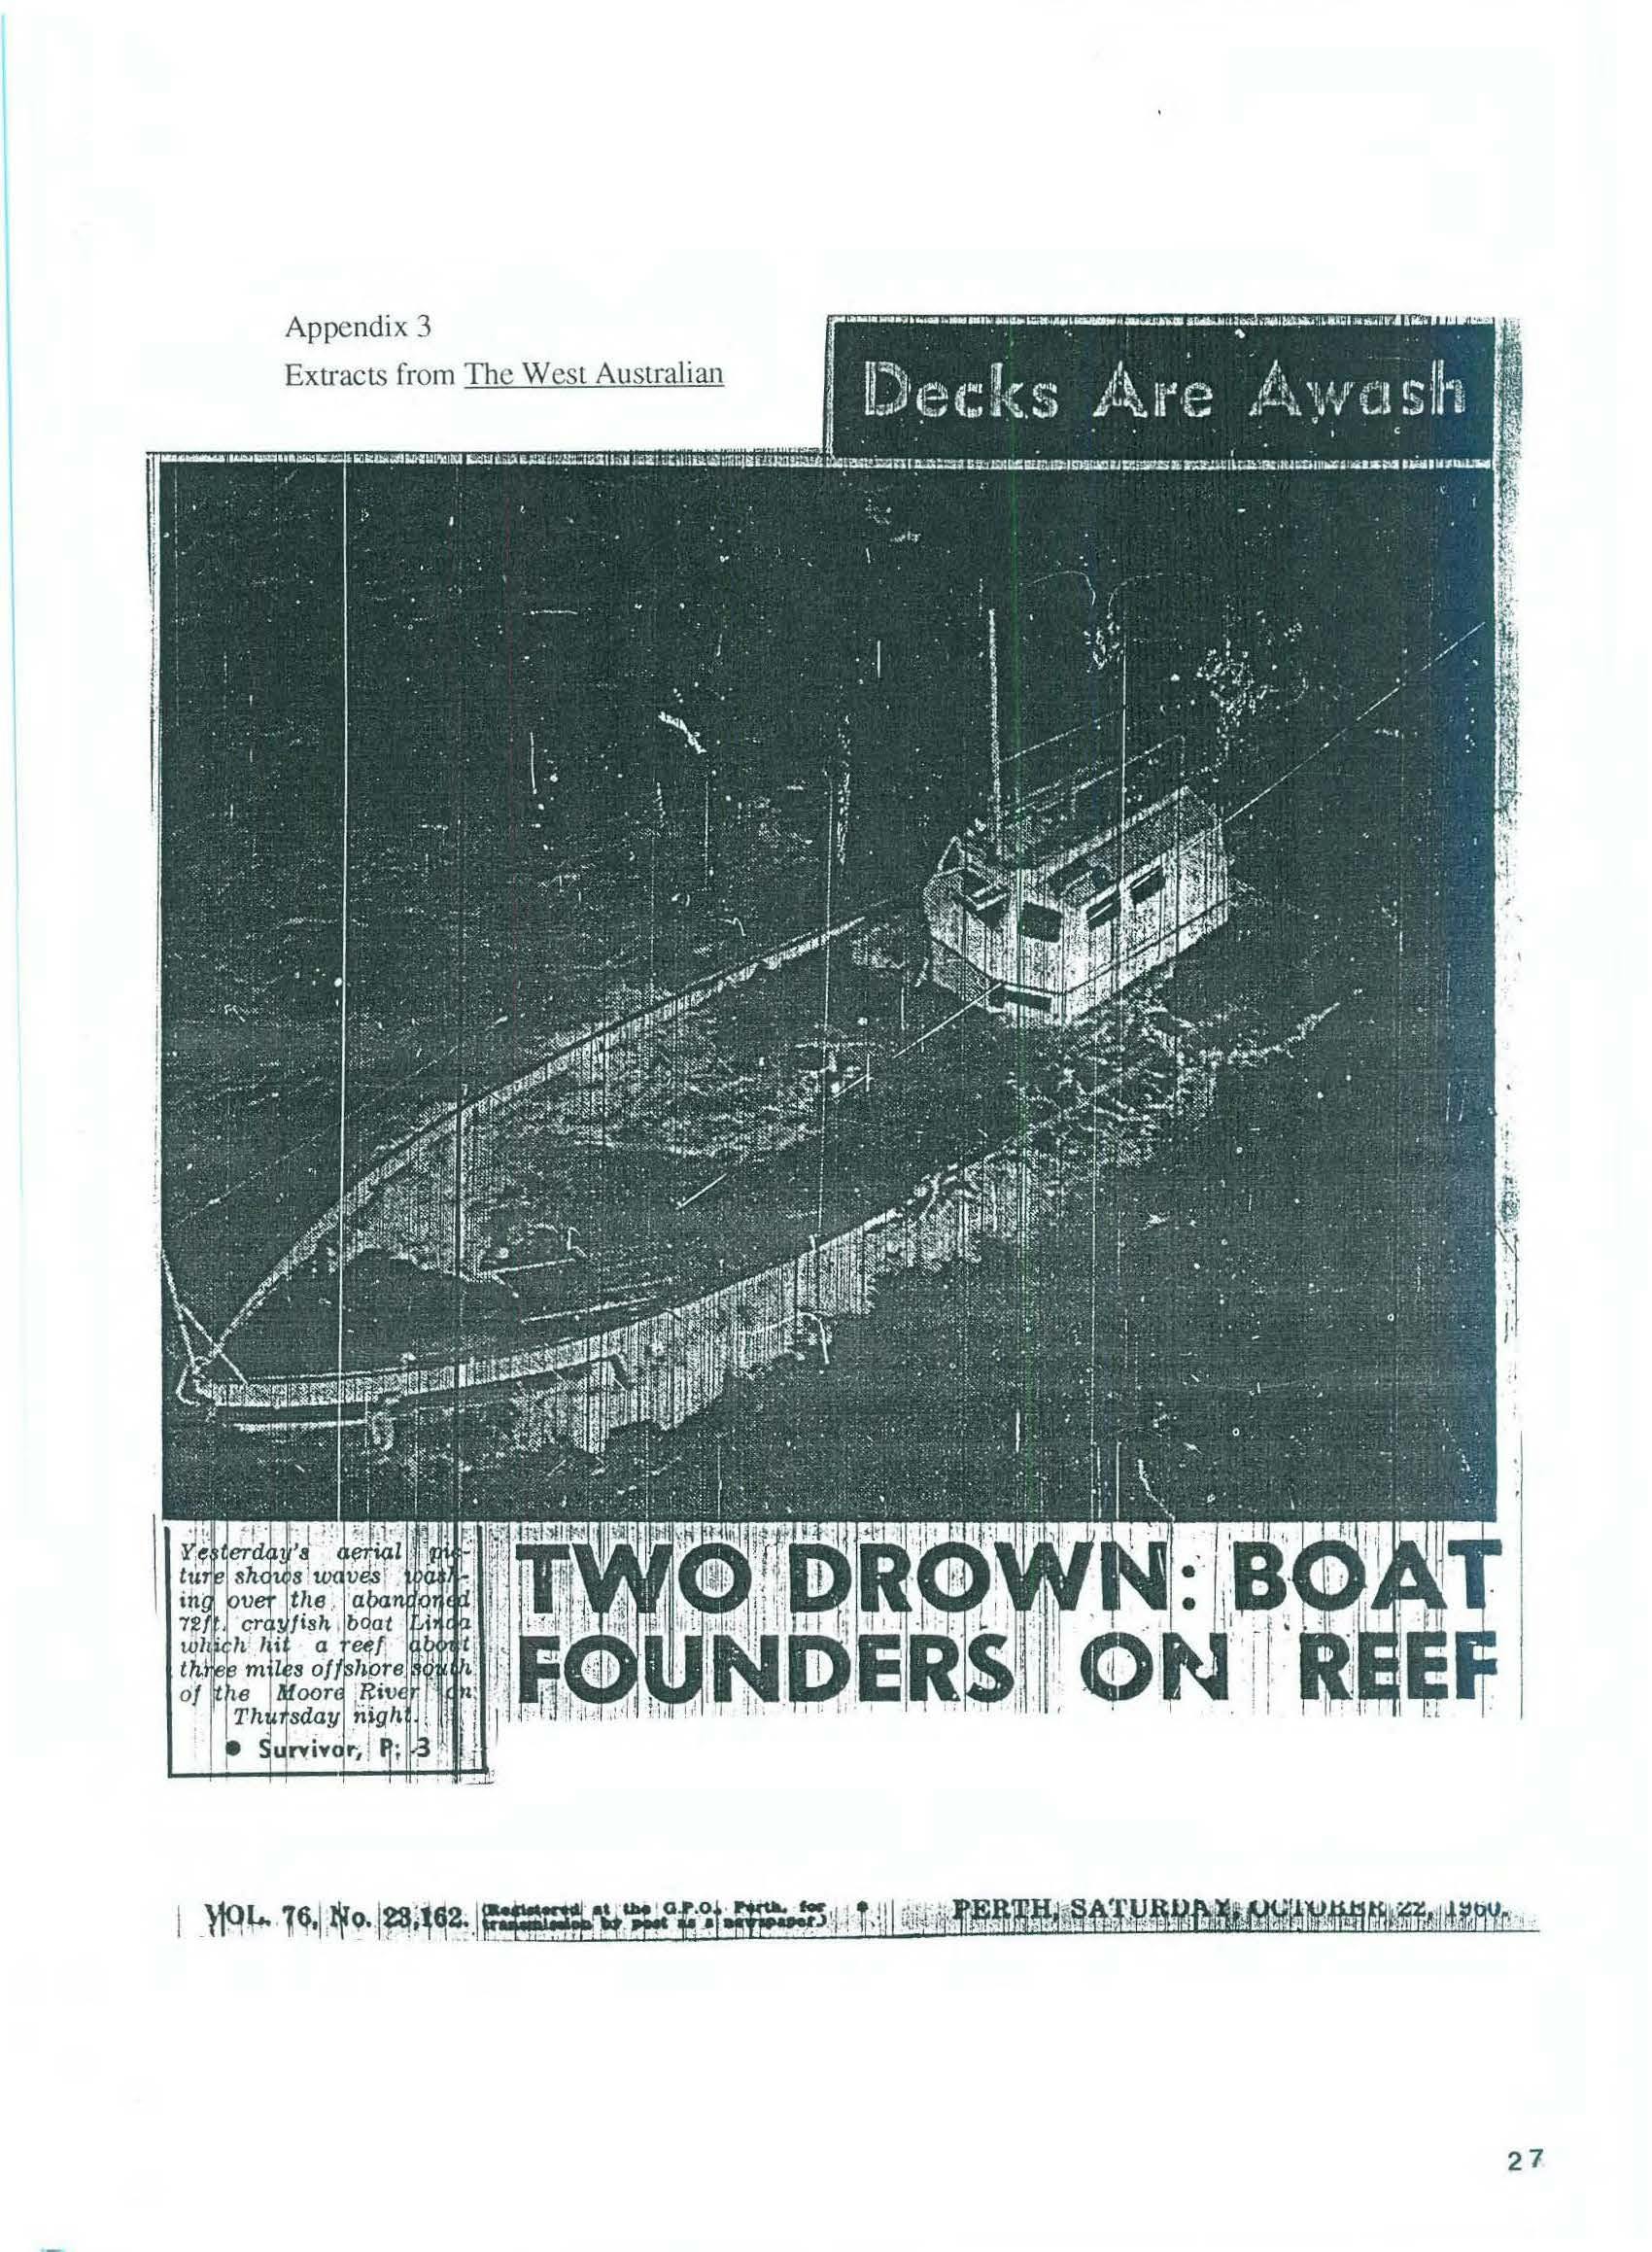 Newspaper clipping of the loss of two fishermen